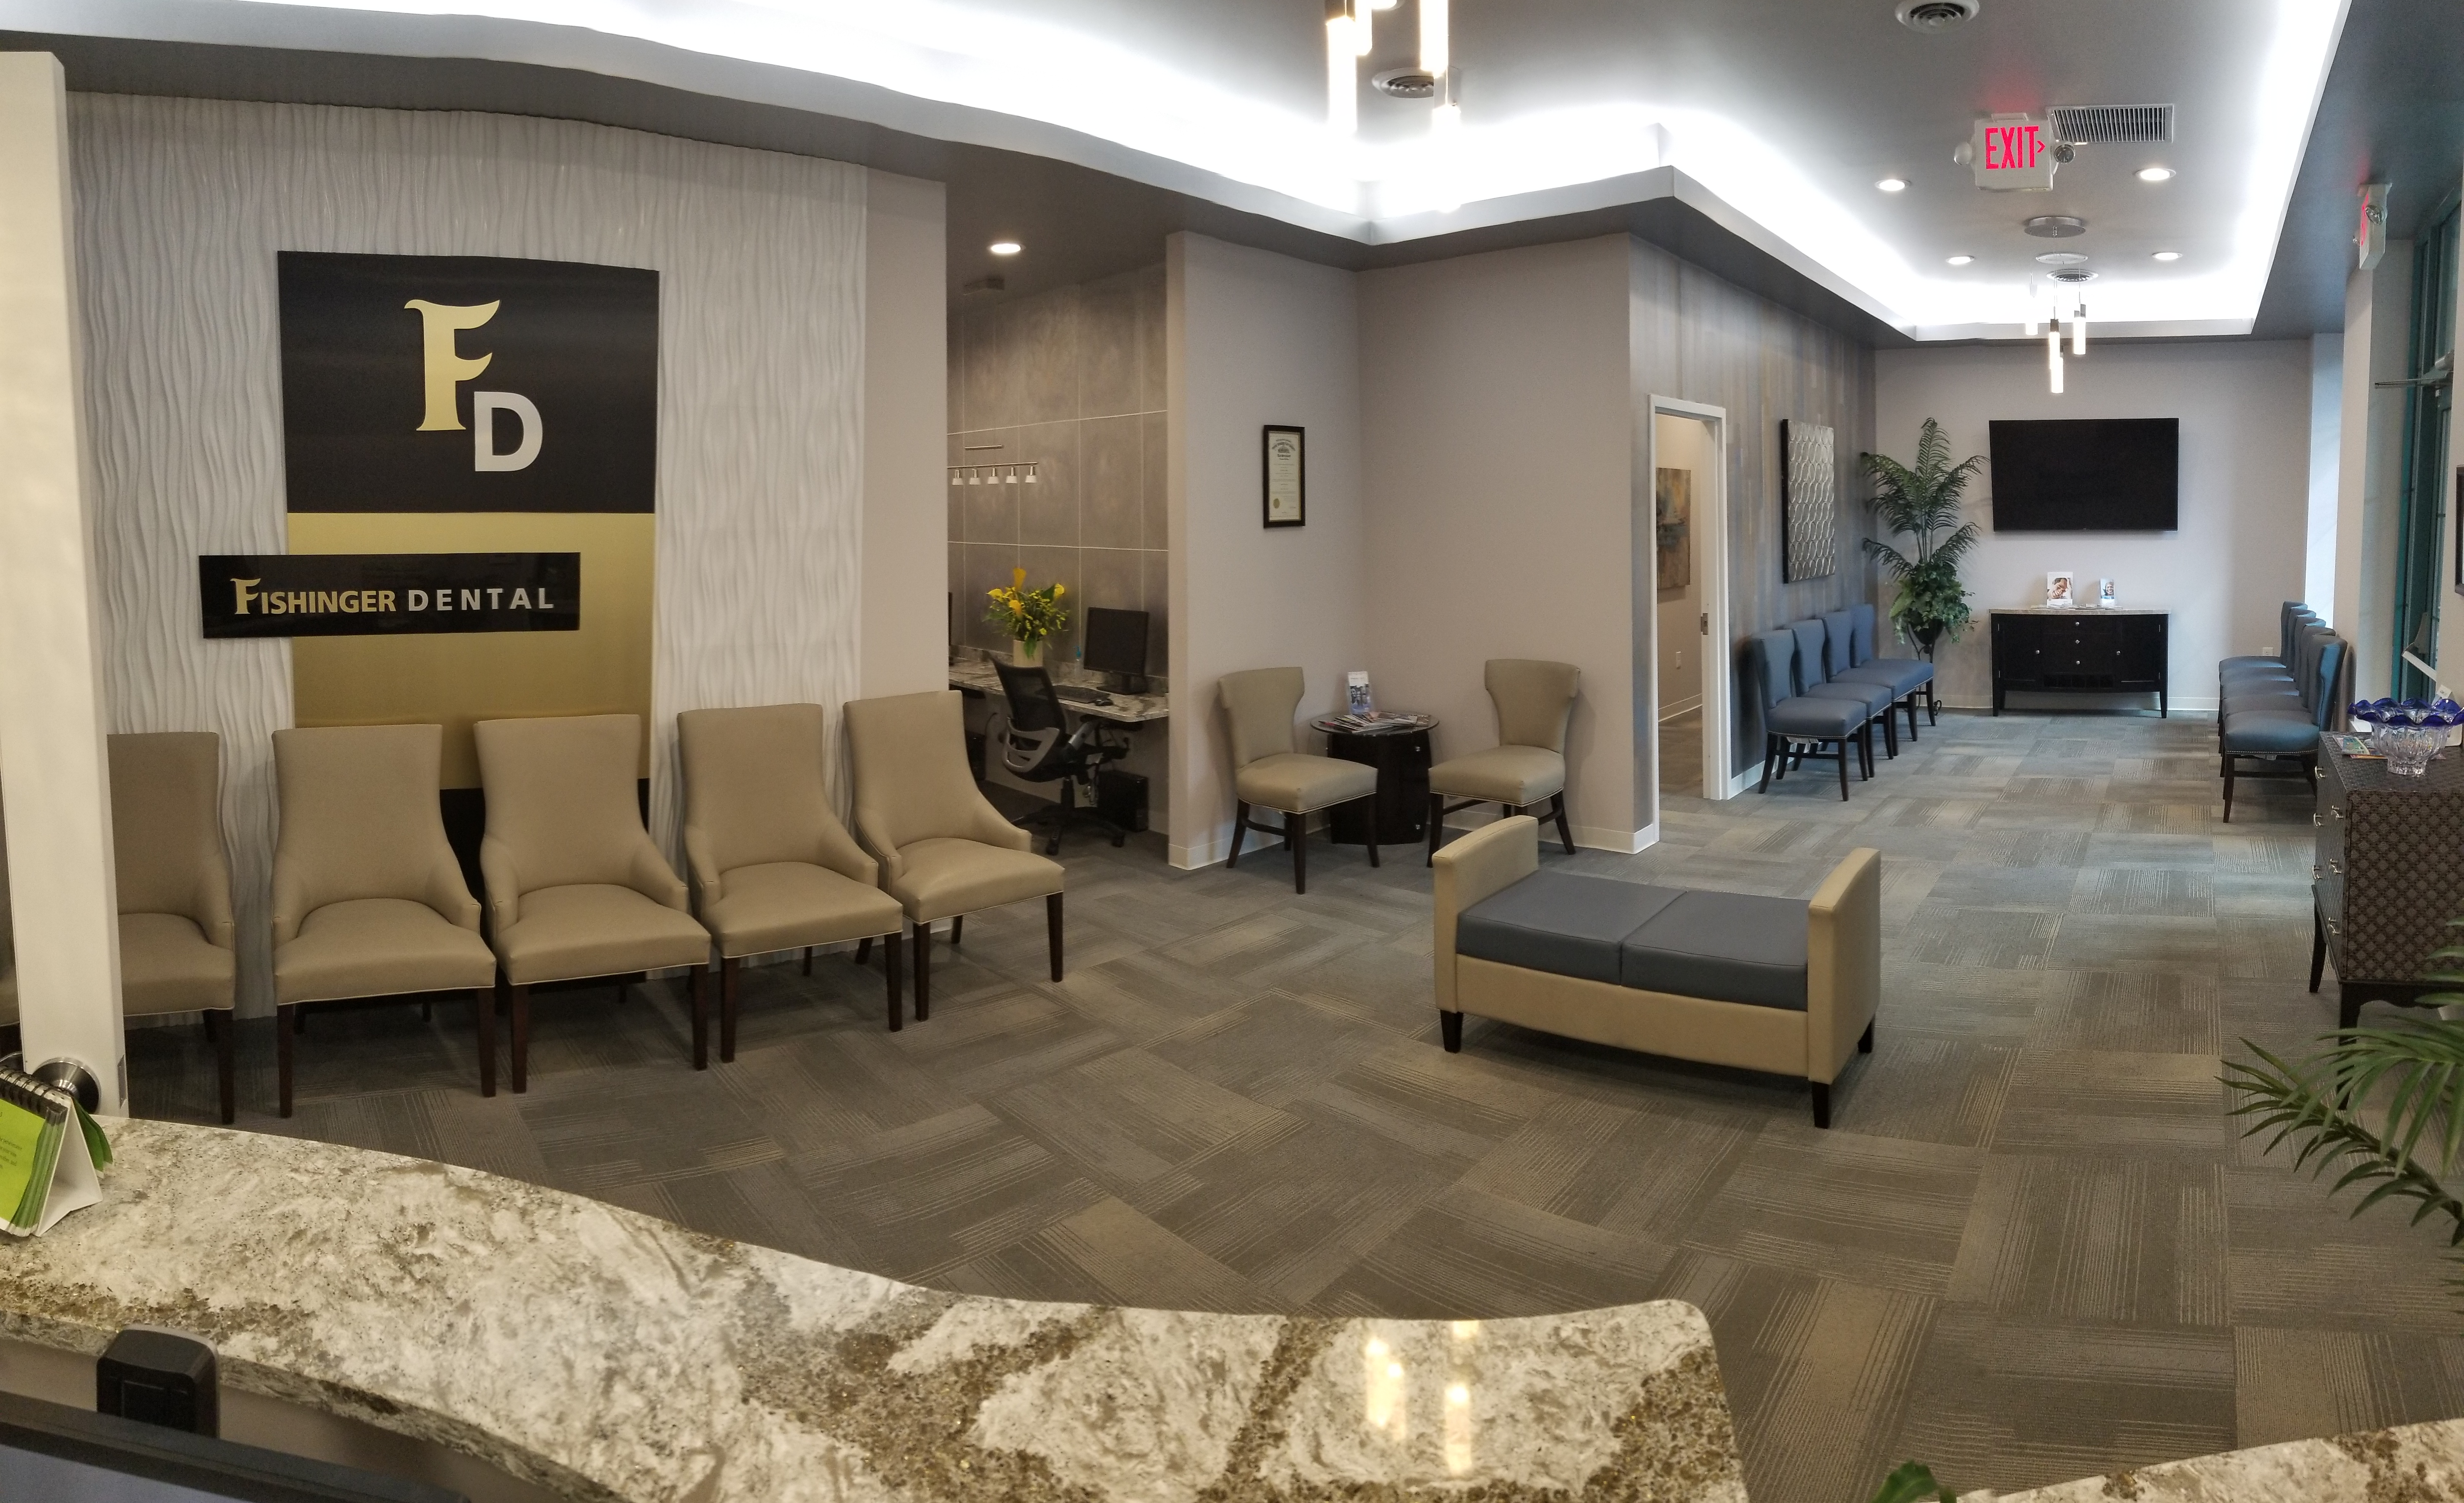 Photo of Office Reception Area